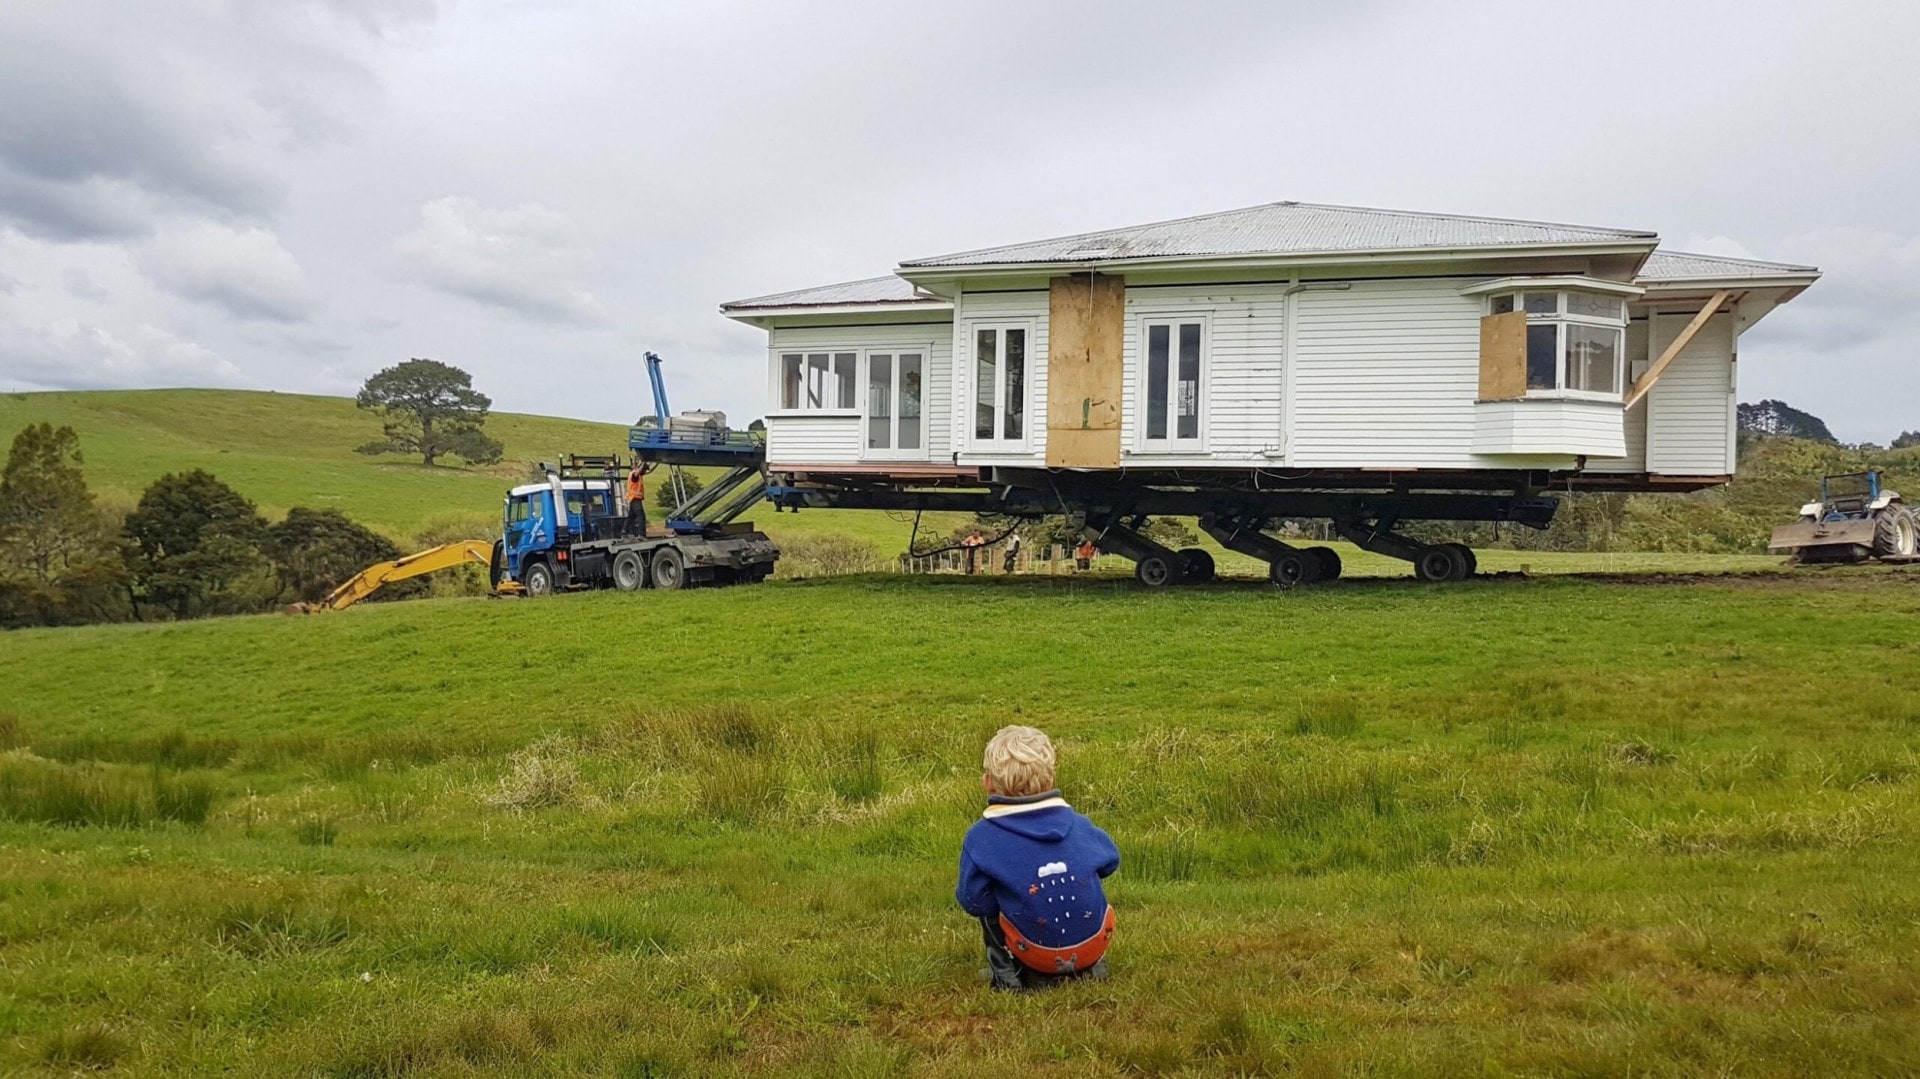 An old single story villa styled home with an angled roof being relocated by a tractor in a green field